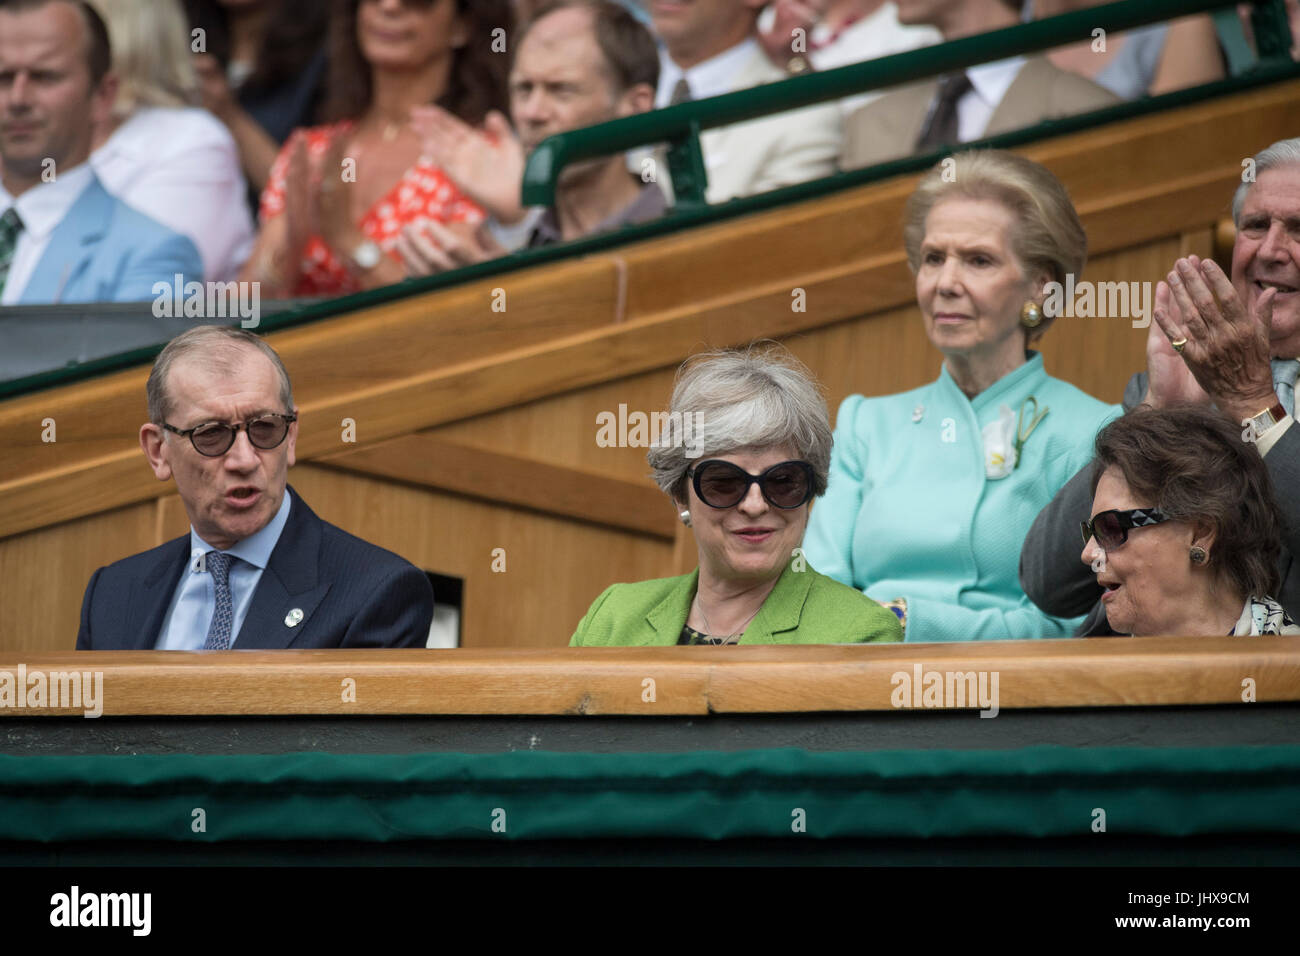 Wimbledon, London, UK. 16th July, 2017. The Wimbledon Tennis Championships 2017 held at The All England Lawn Tennis and Croquet Club, London, England, UK. GENTLEMEN'S SINGLES - FINAL Roger Federer (SUI) [3] v Marin Cilic (CRO) [7] on Centre Court. Prime Minister Theresa May watches the match from the Royal Box with her husband Philip. Credit: Duncan Grove/Alamy Live News Stock Photo